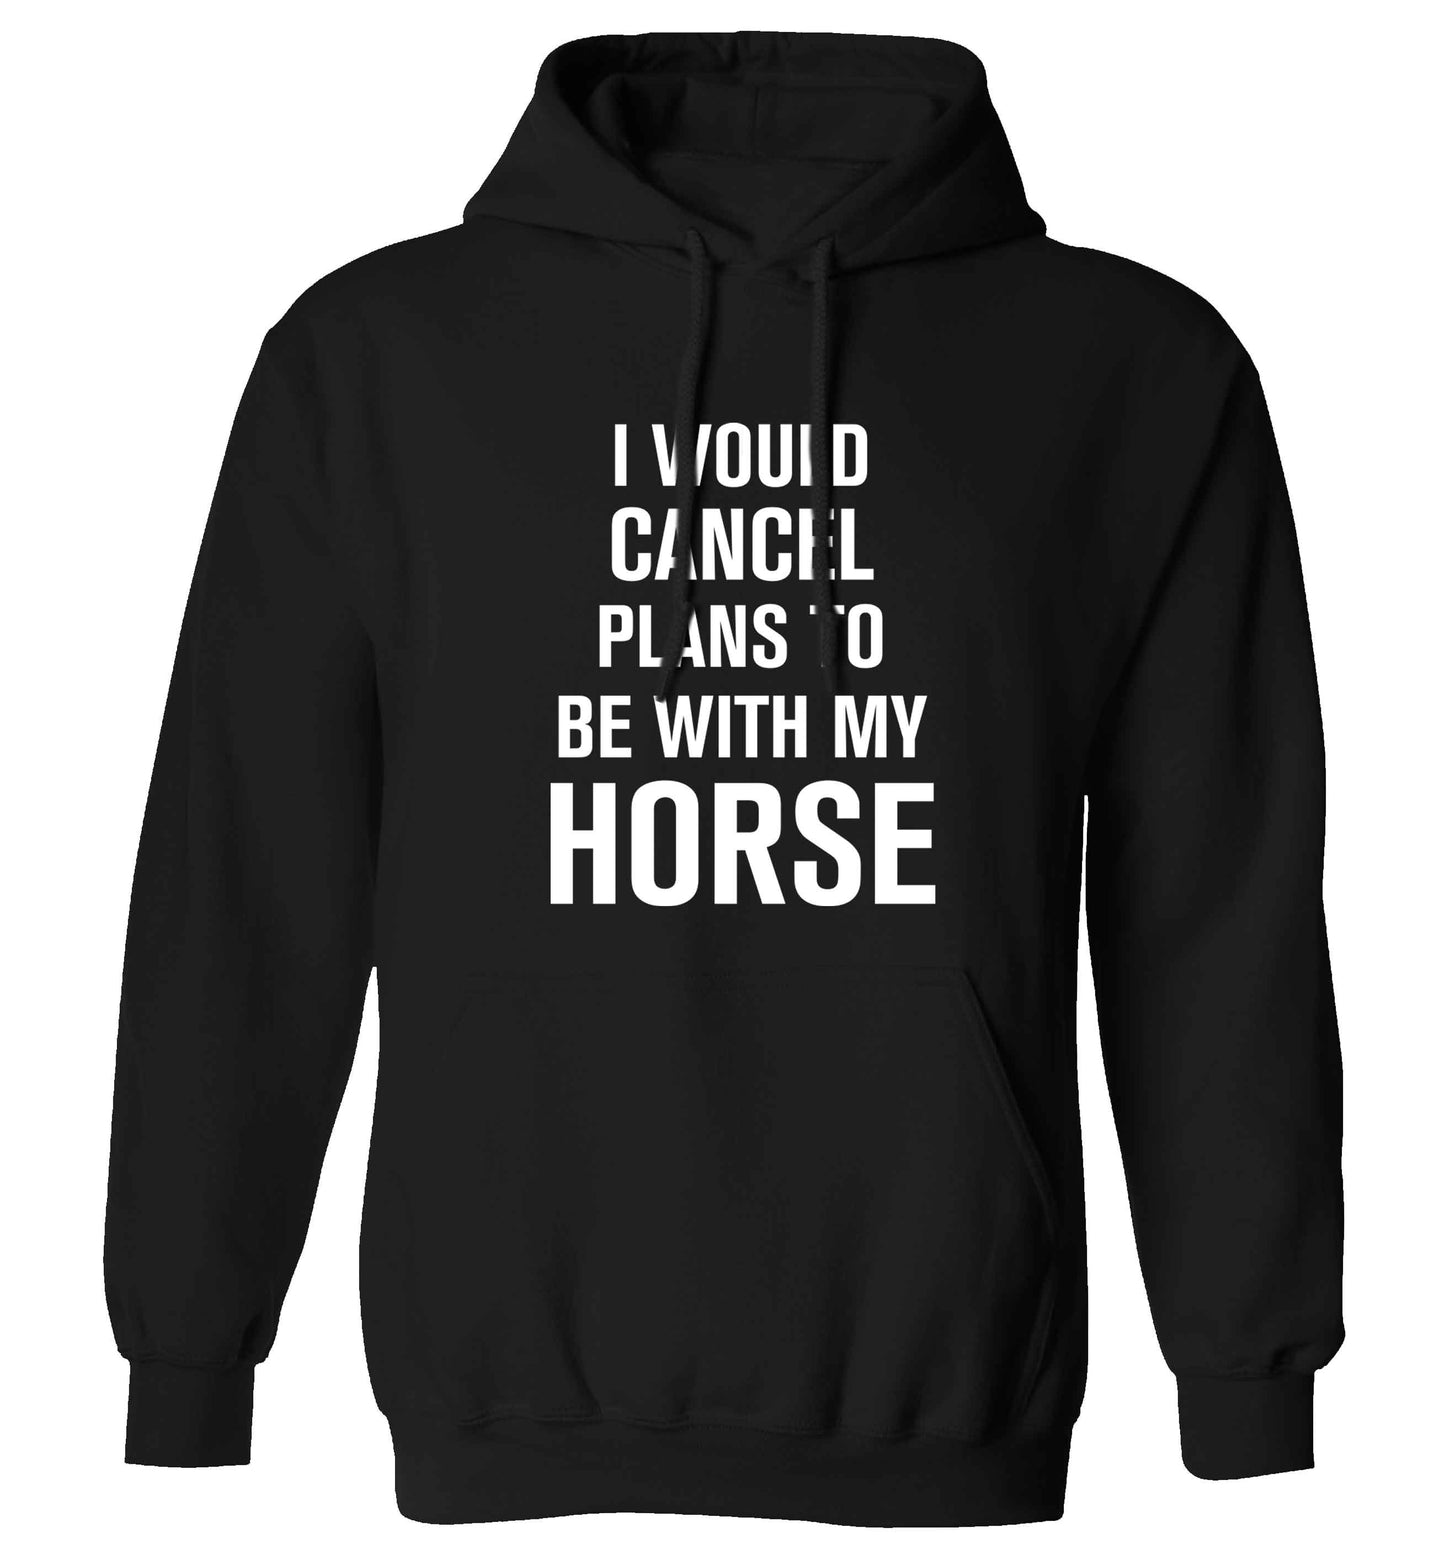 I will cancel plans to be with my horse adults unisex black hoodie 2XL